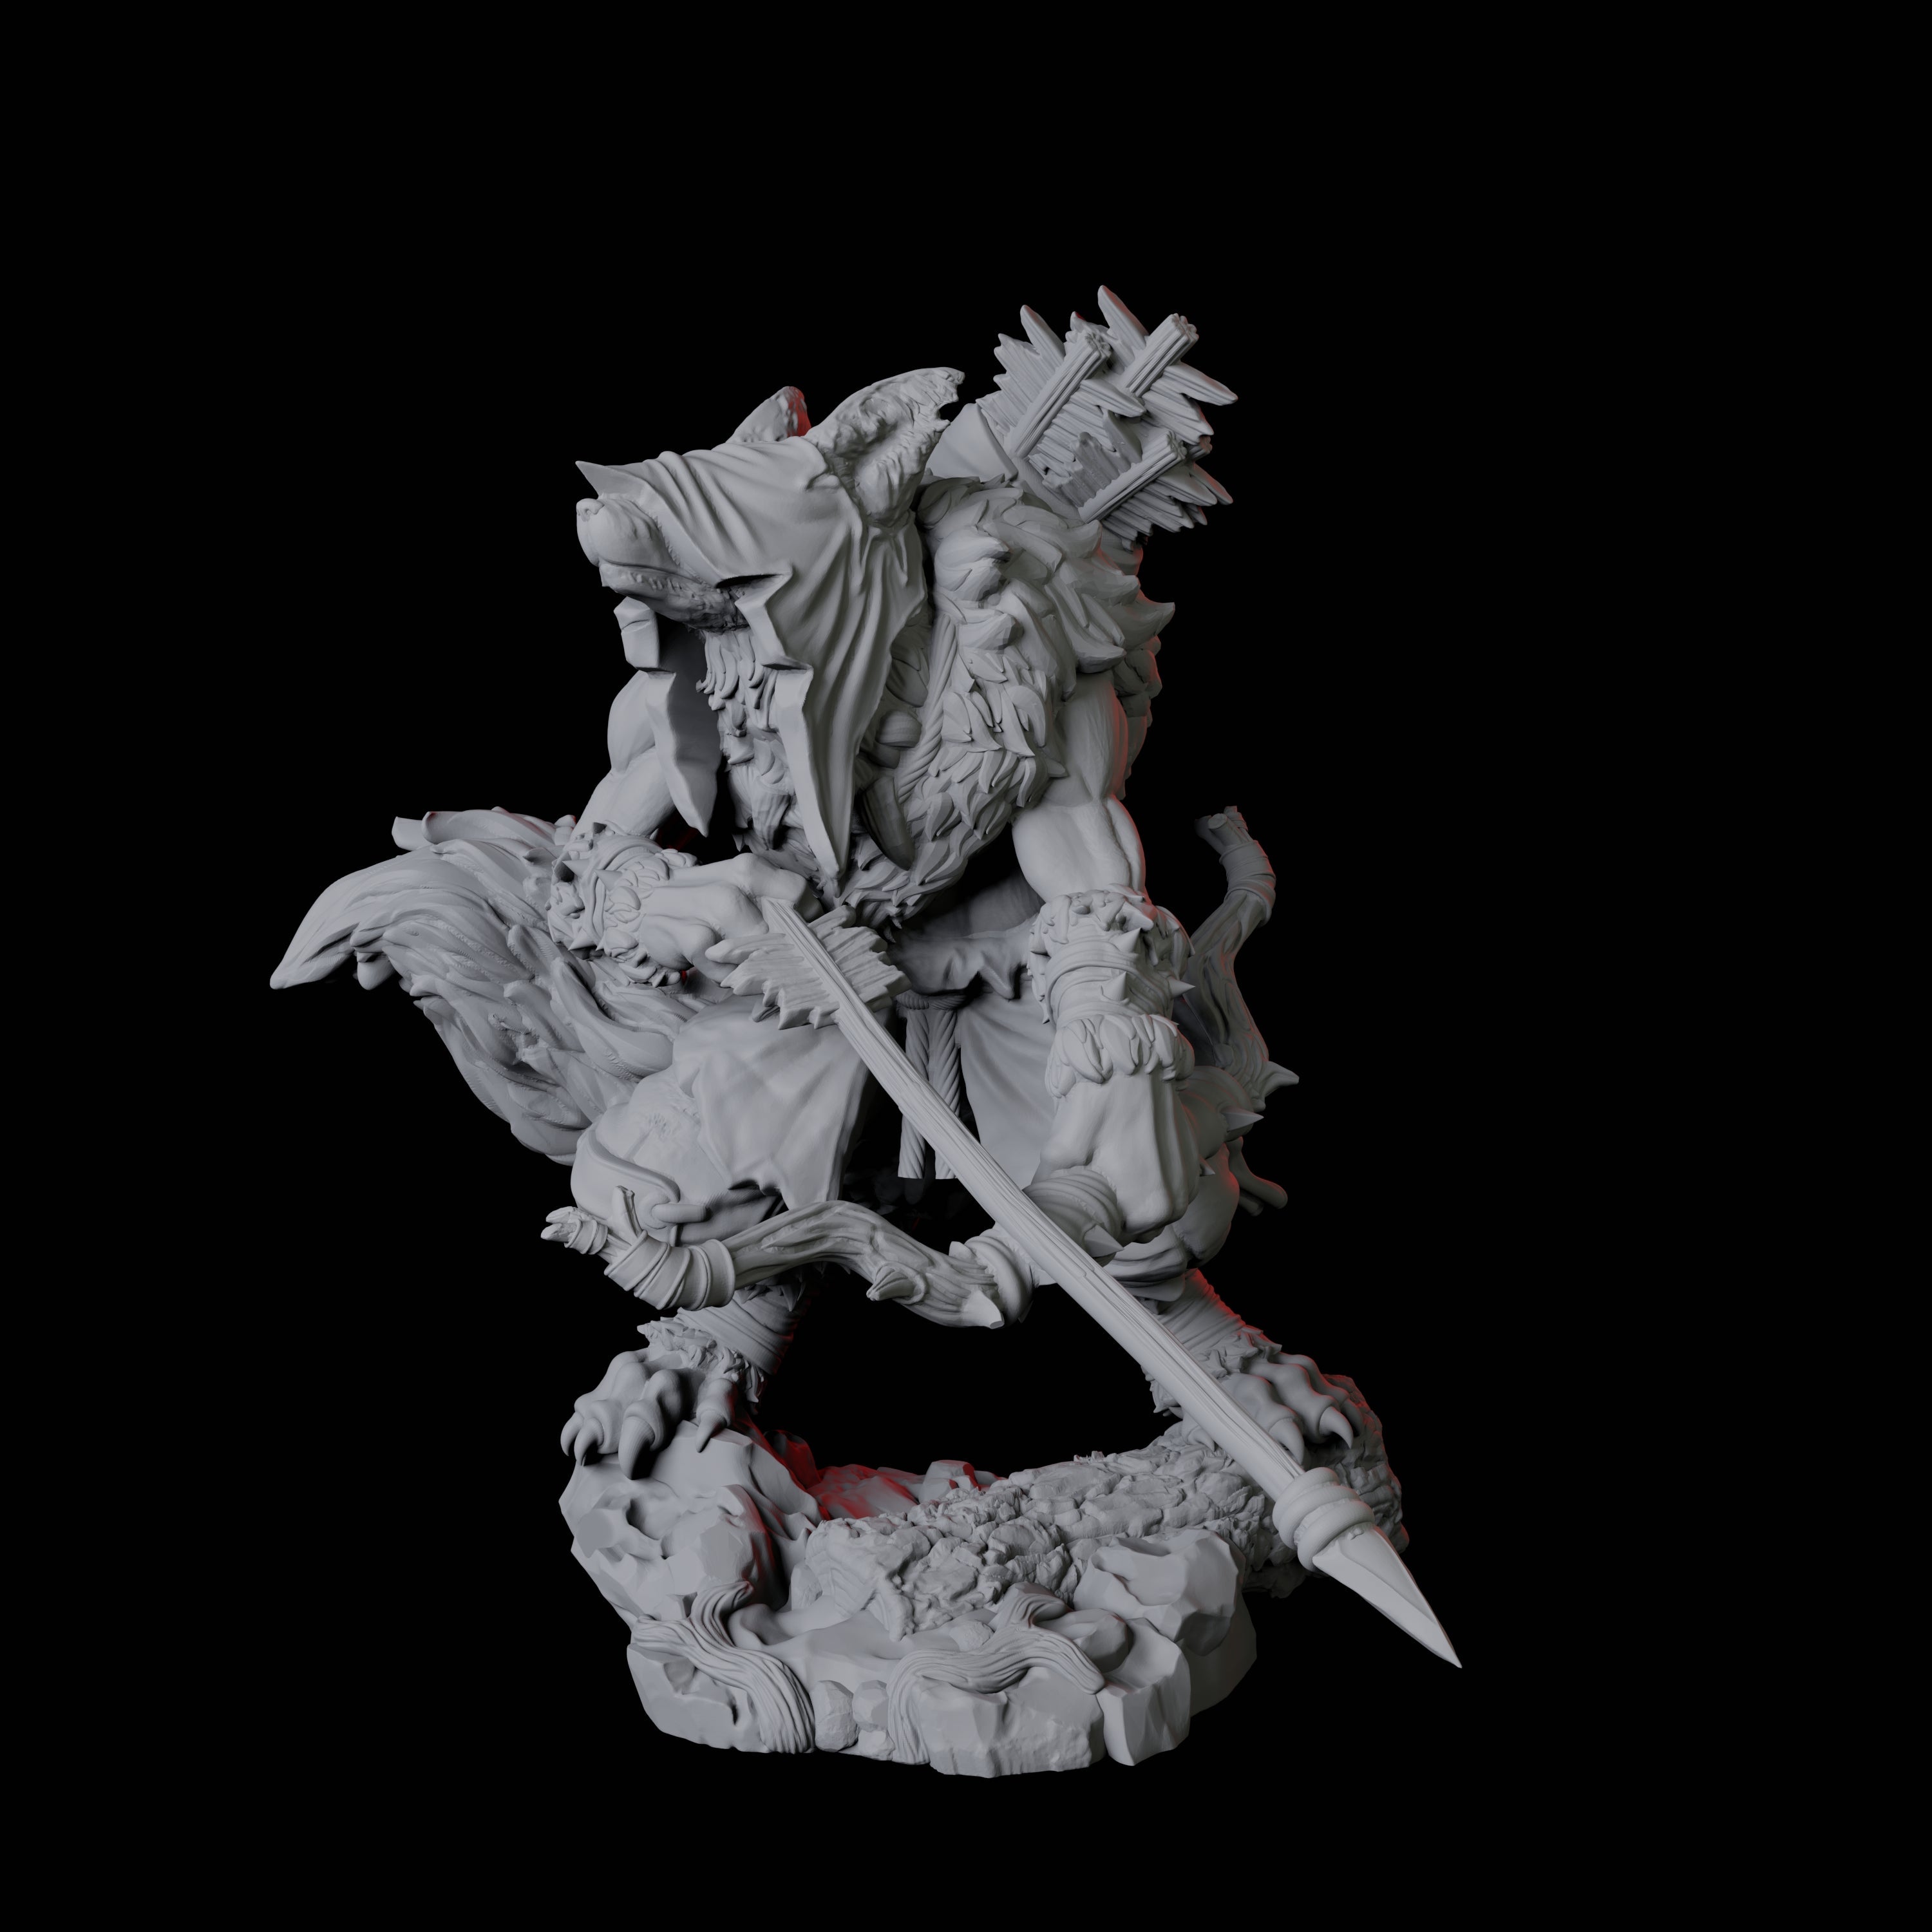 Cunning Kitsune Fighter A Miniature for Dungeons and Dragons, Pathfinder or other TTRPGs